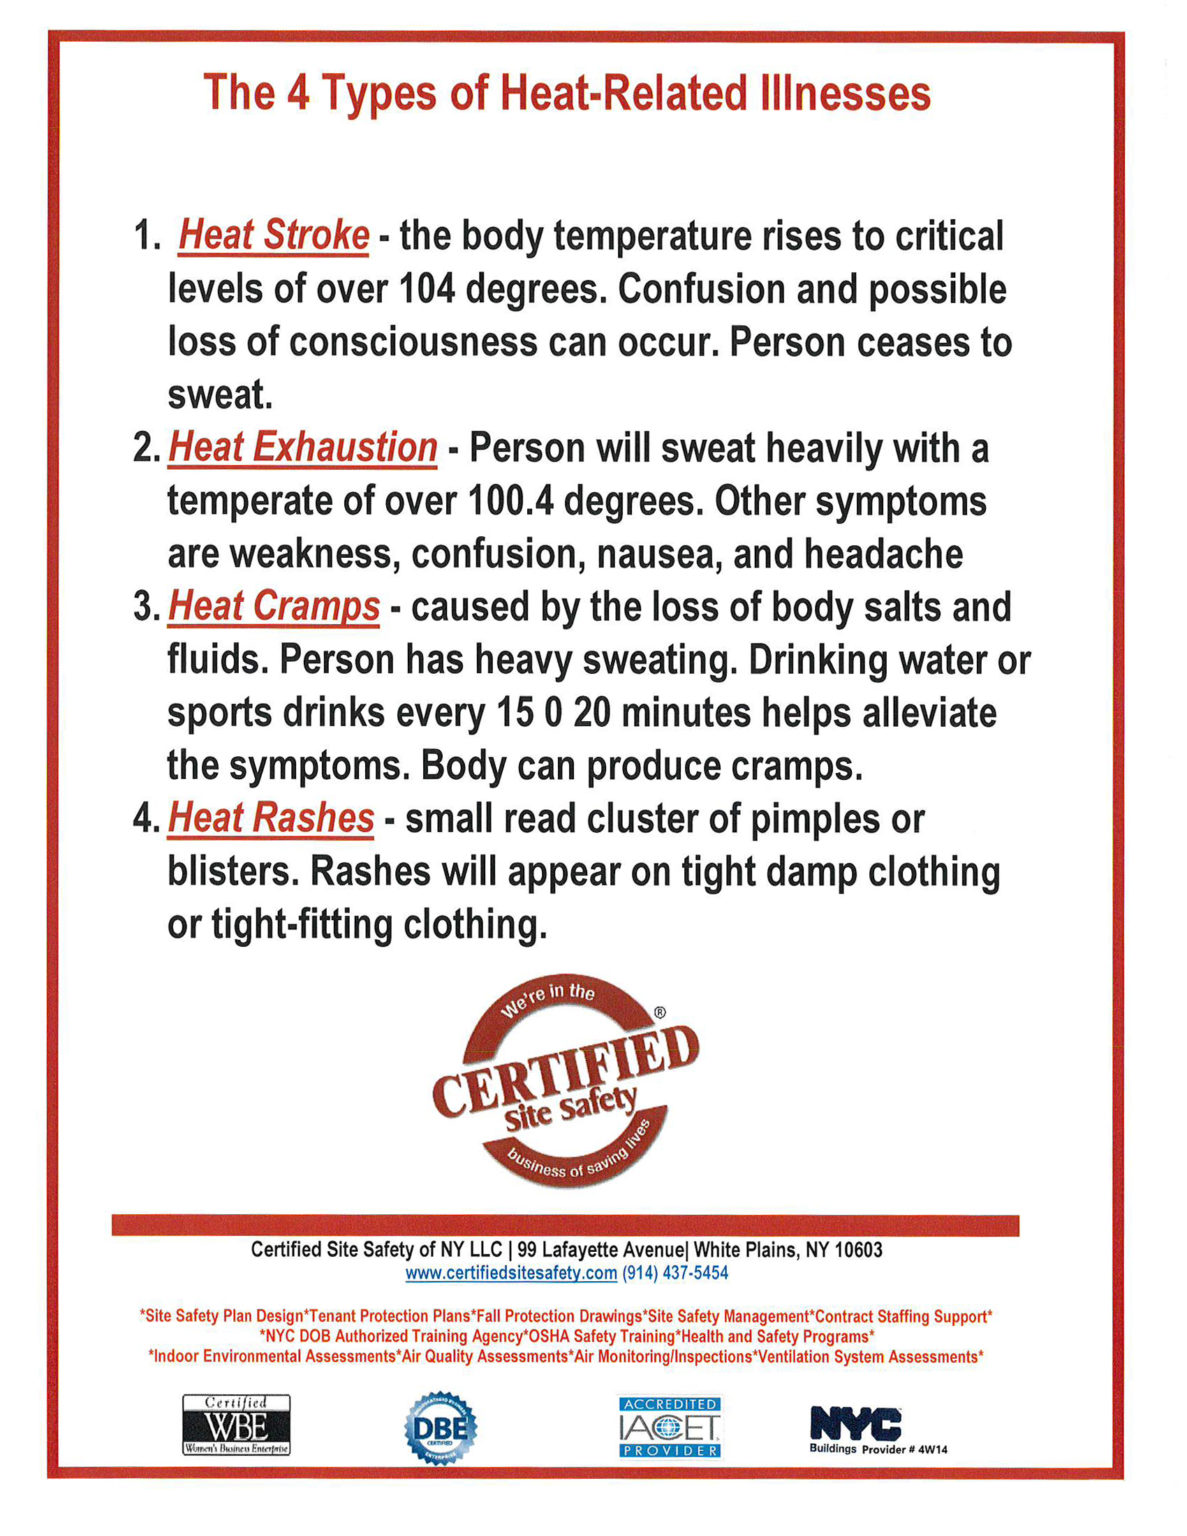 4 Types of Heat-Related Illnesses | Certified Site Safety